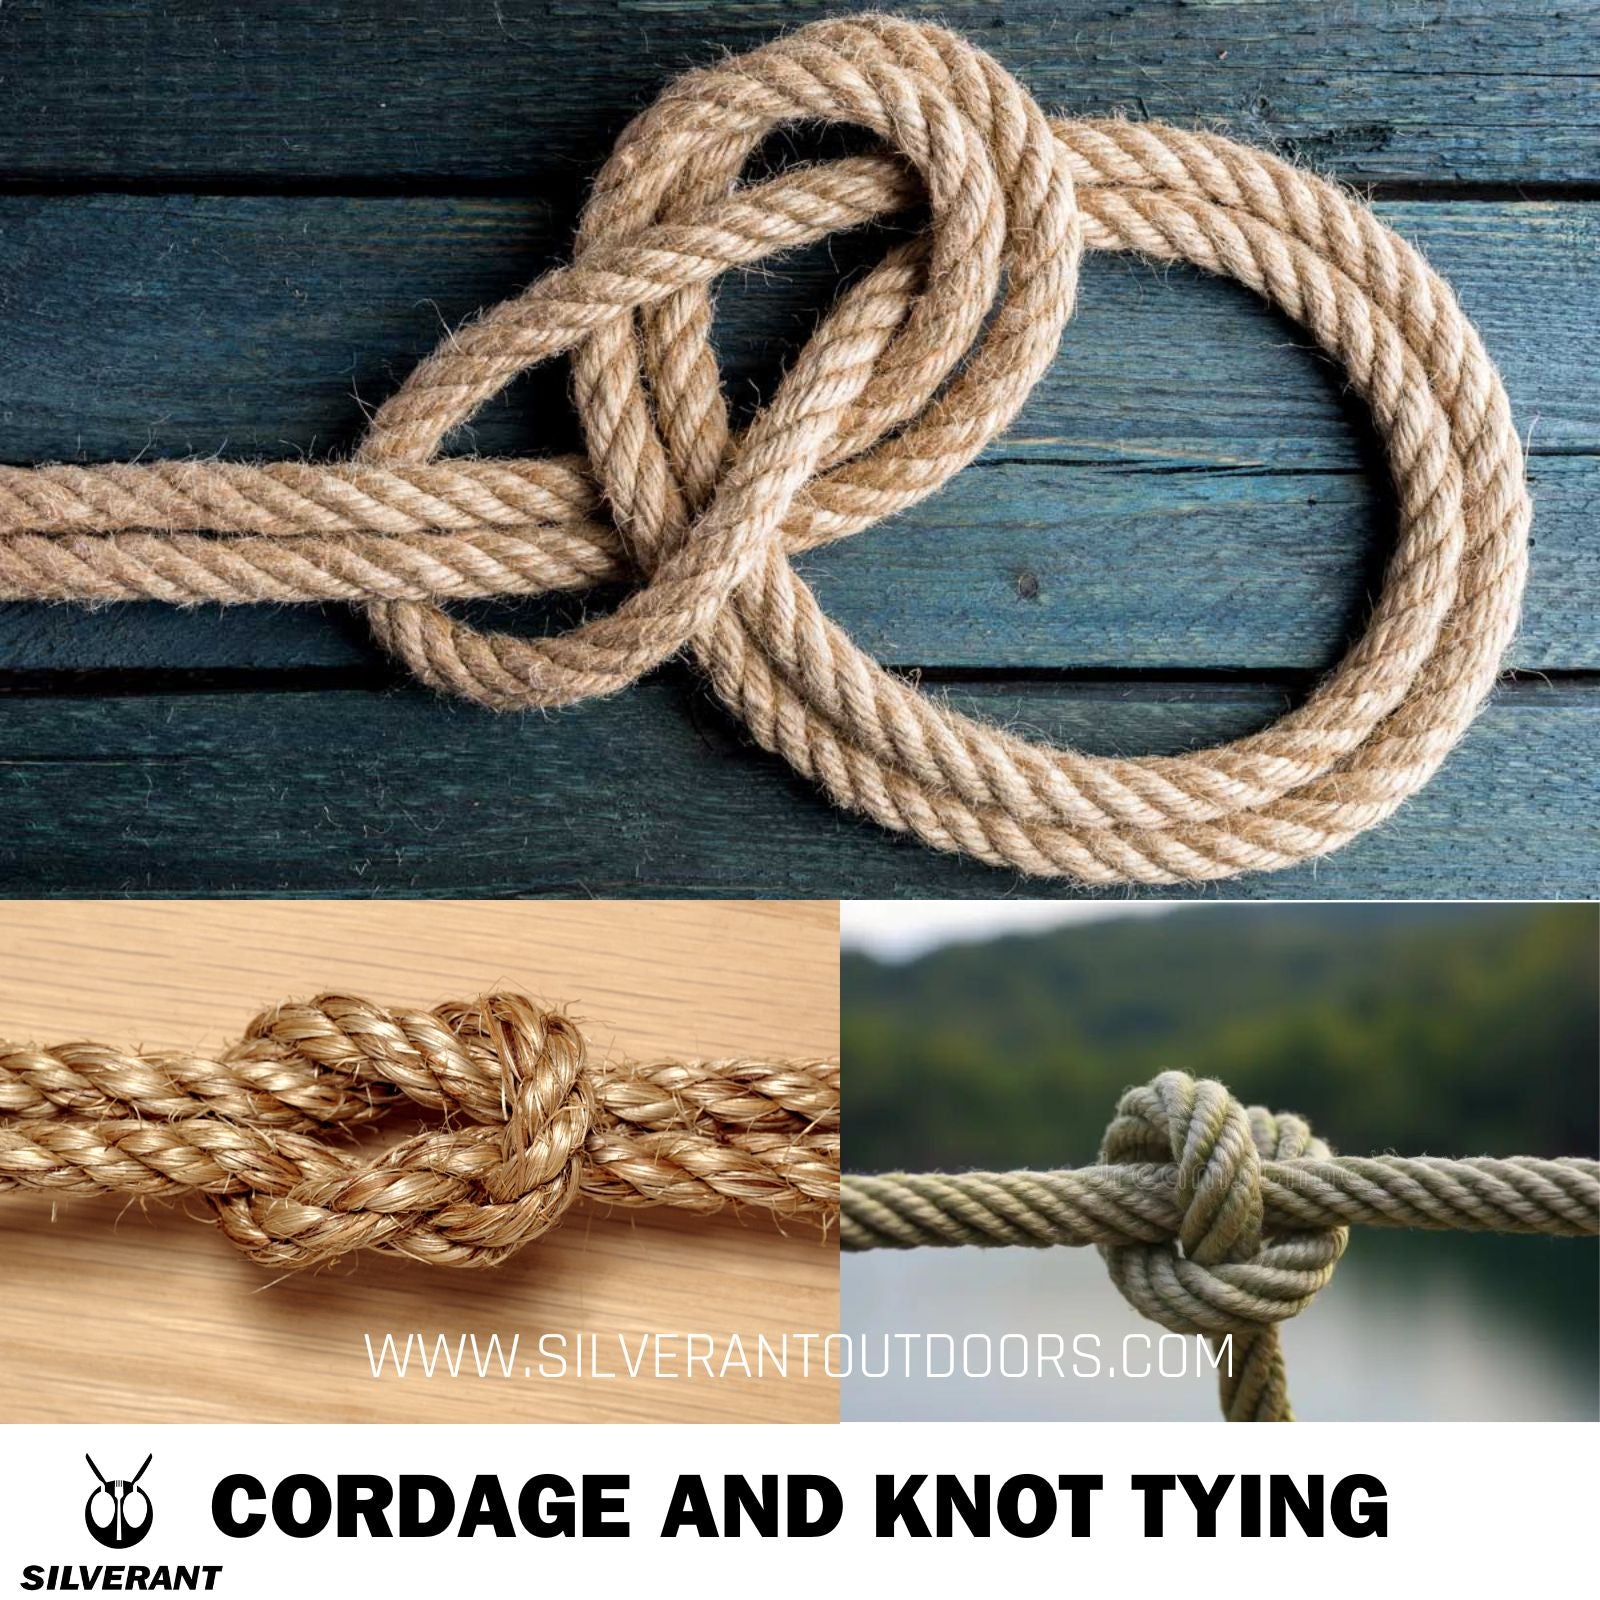 Cordage and Knot Tying